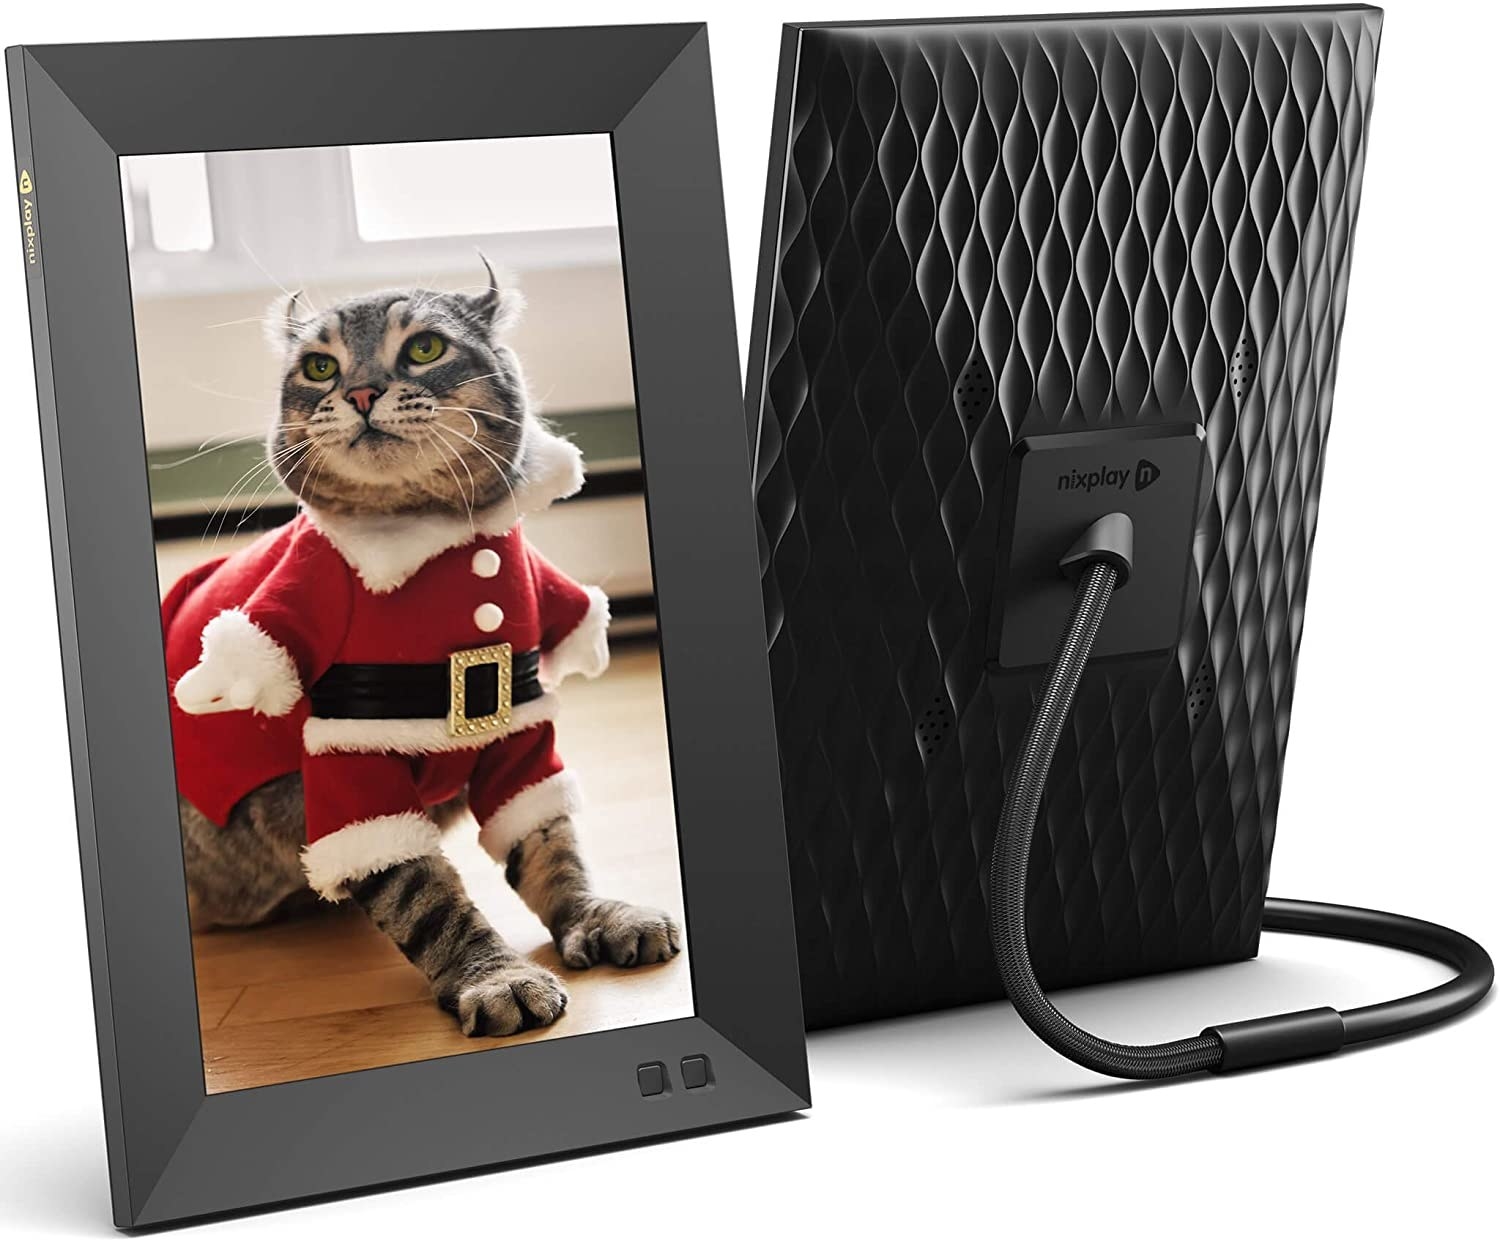 Digital picture frame with cat in a Santa outfit photo